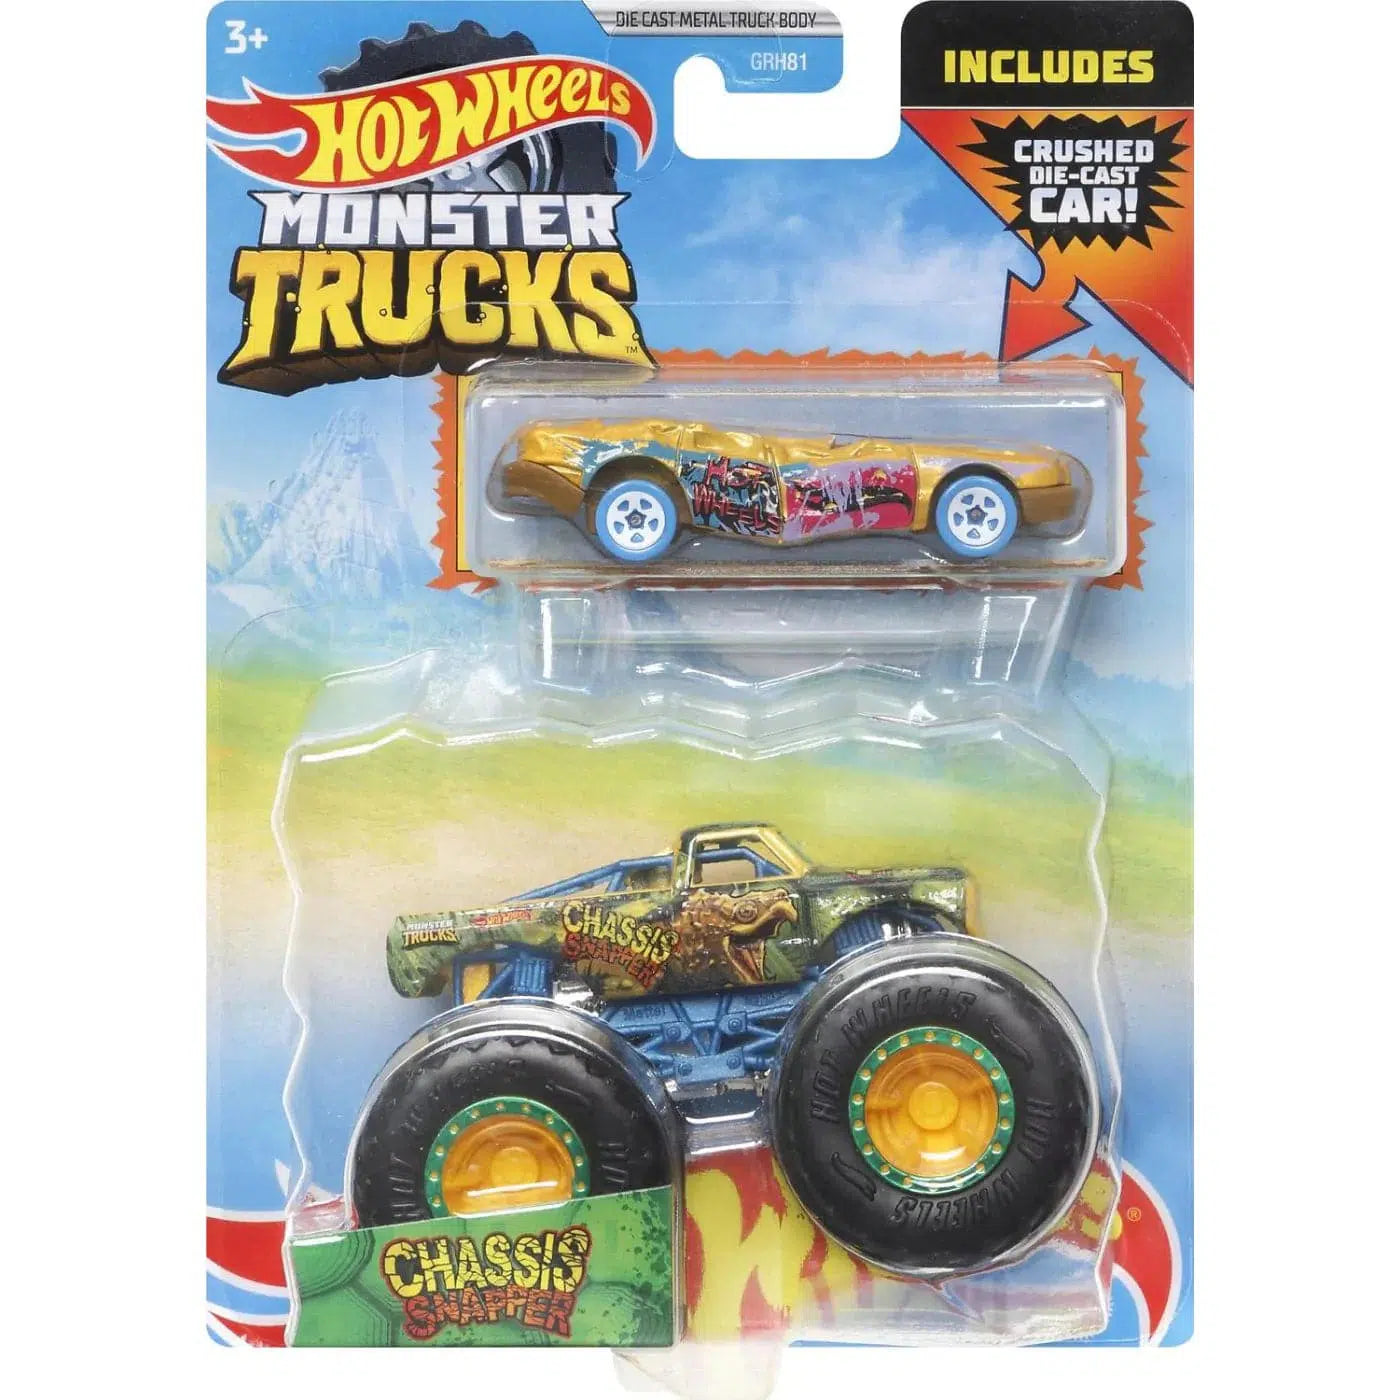 Mattel-Hot Wheels Monster Truck & Car - Assorted Styles-HDB99-Chassis Snapper-Legacy Toys